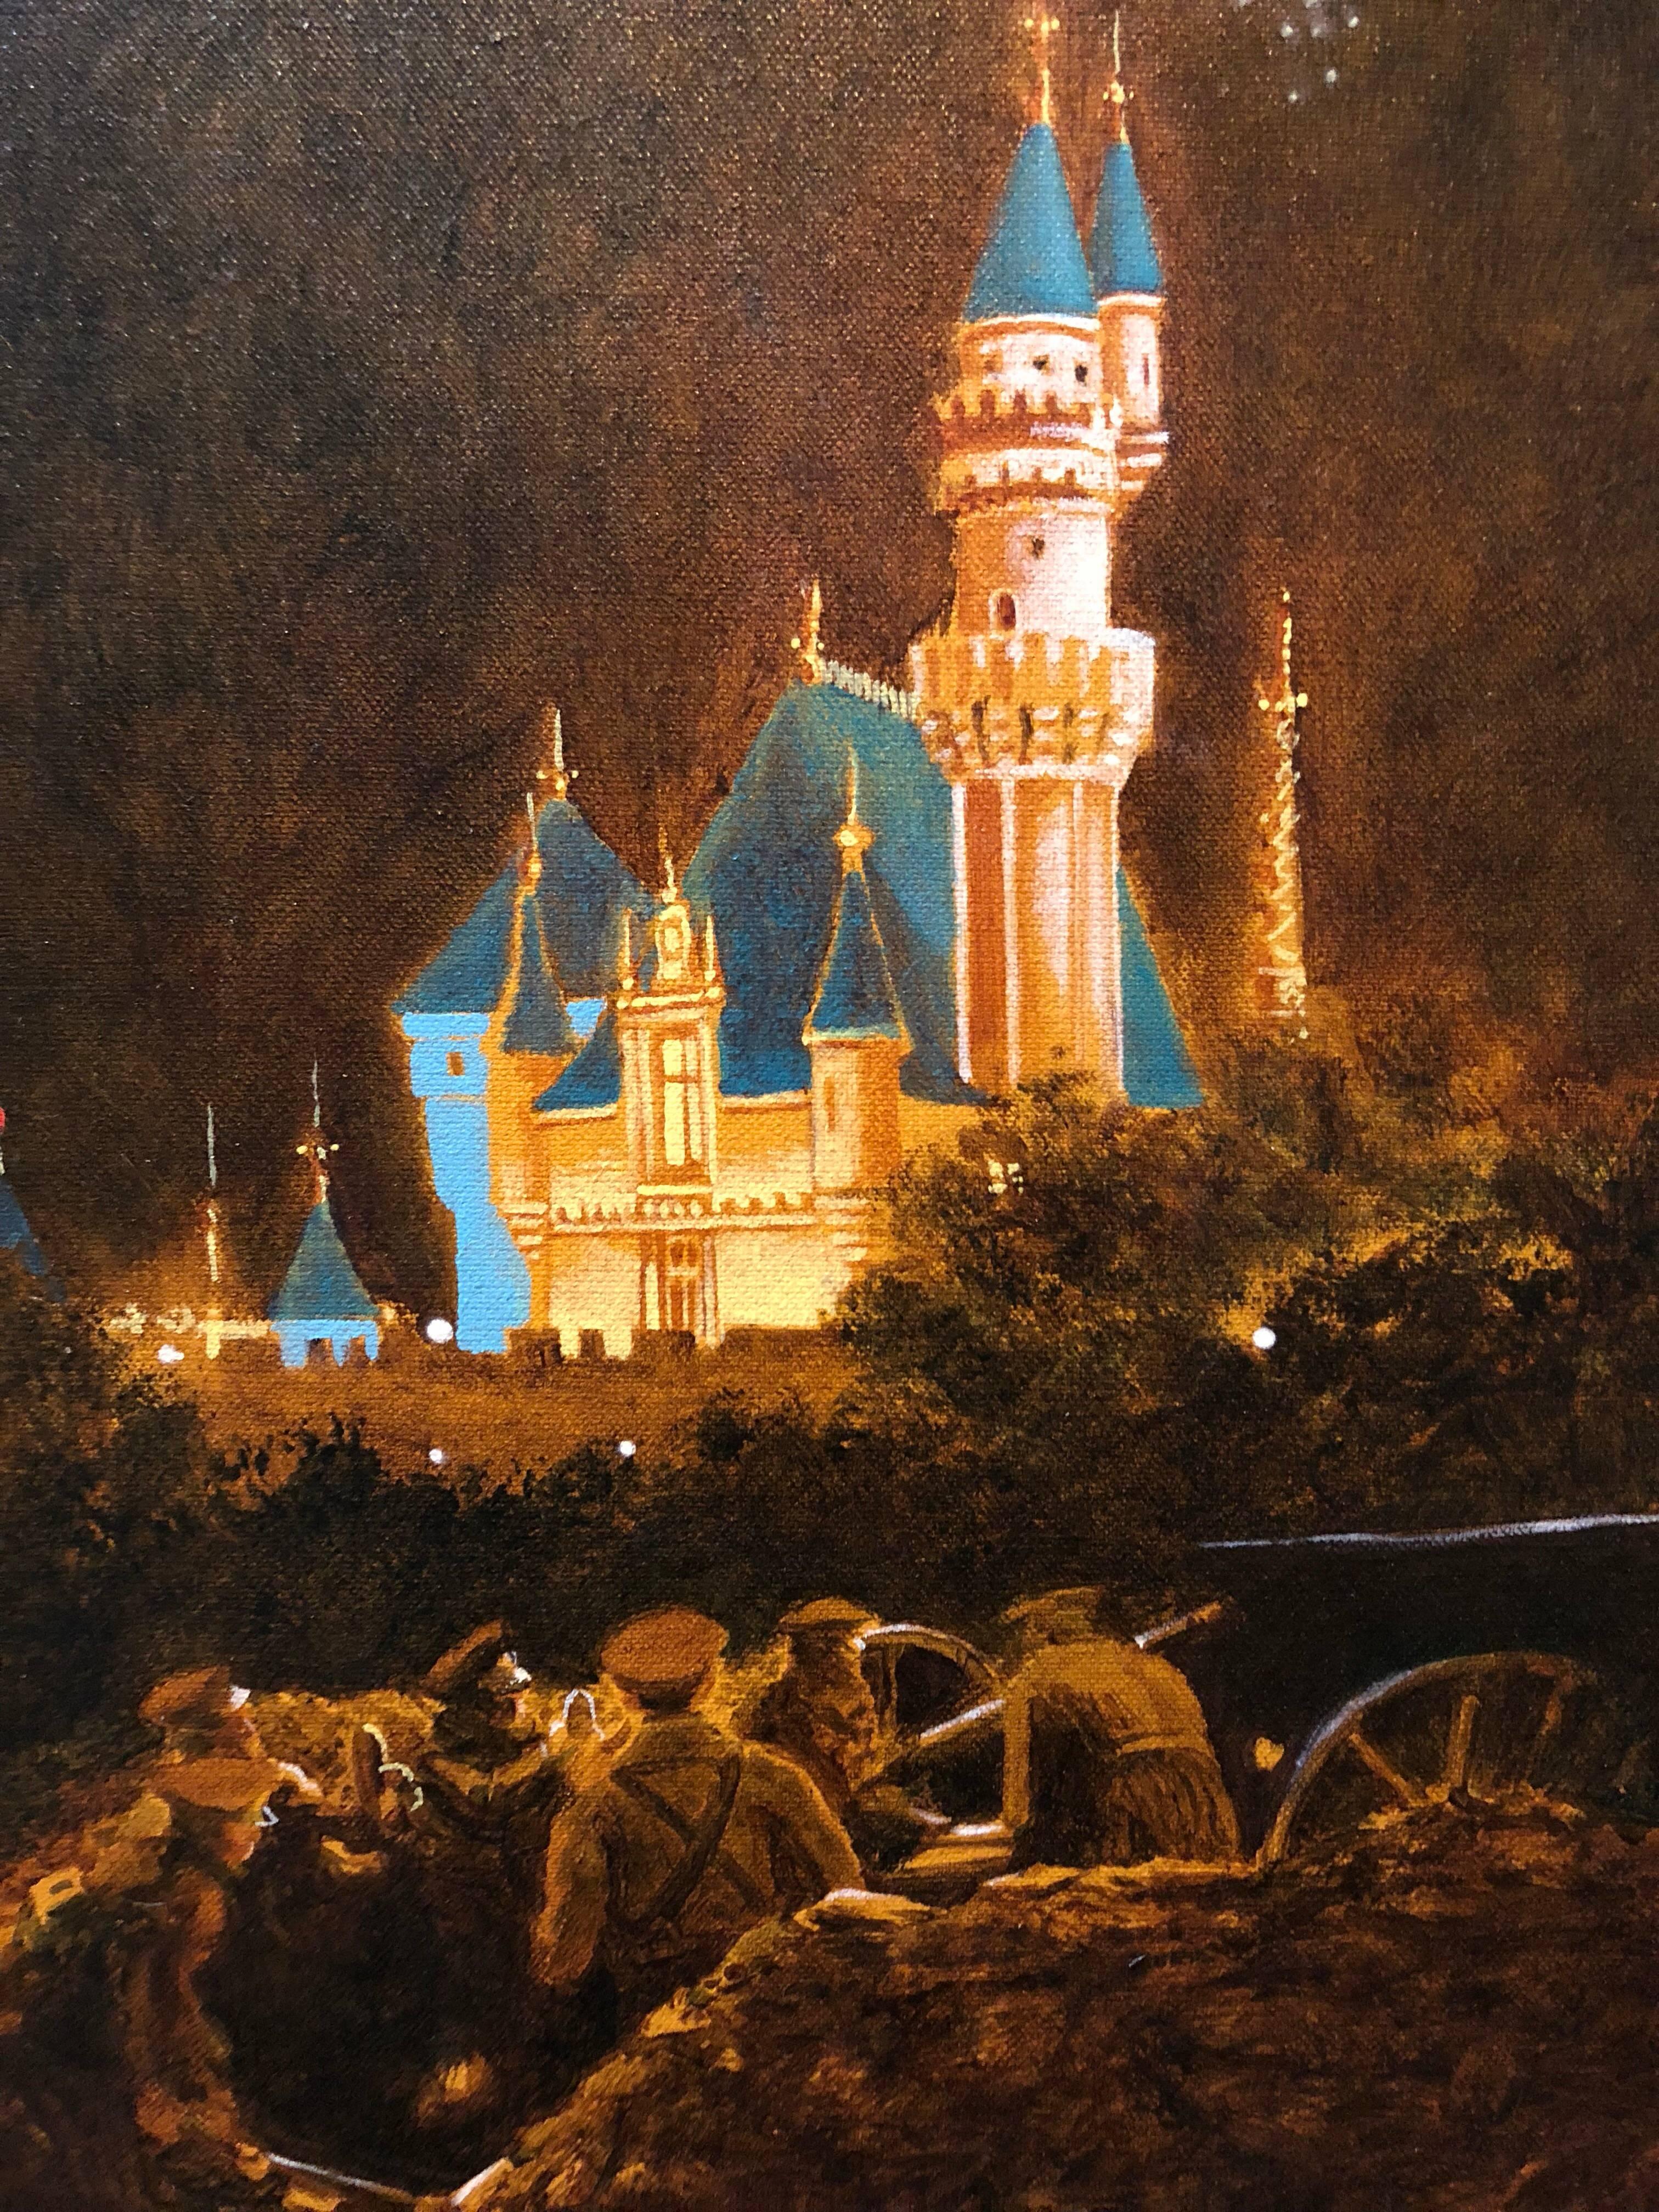 John Bowman Landscape Painting - October, Night Scene with Castle and Soldiers Oil Painting